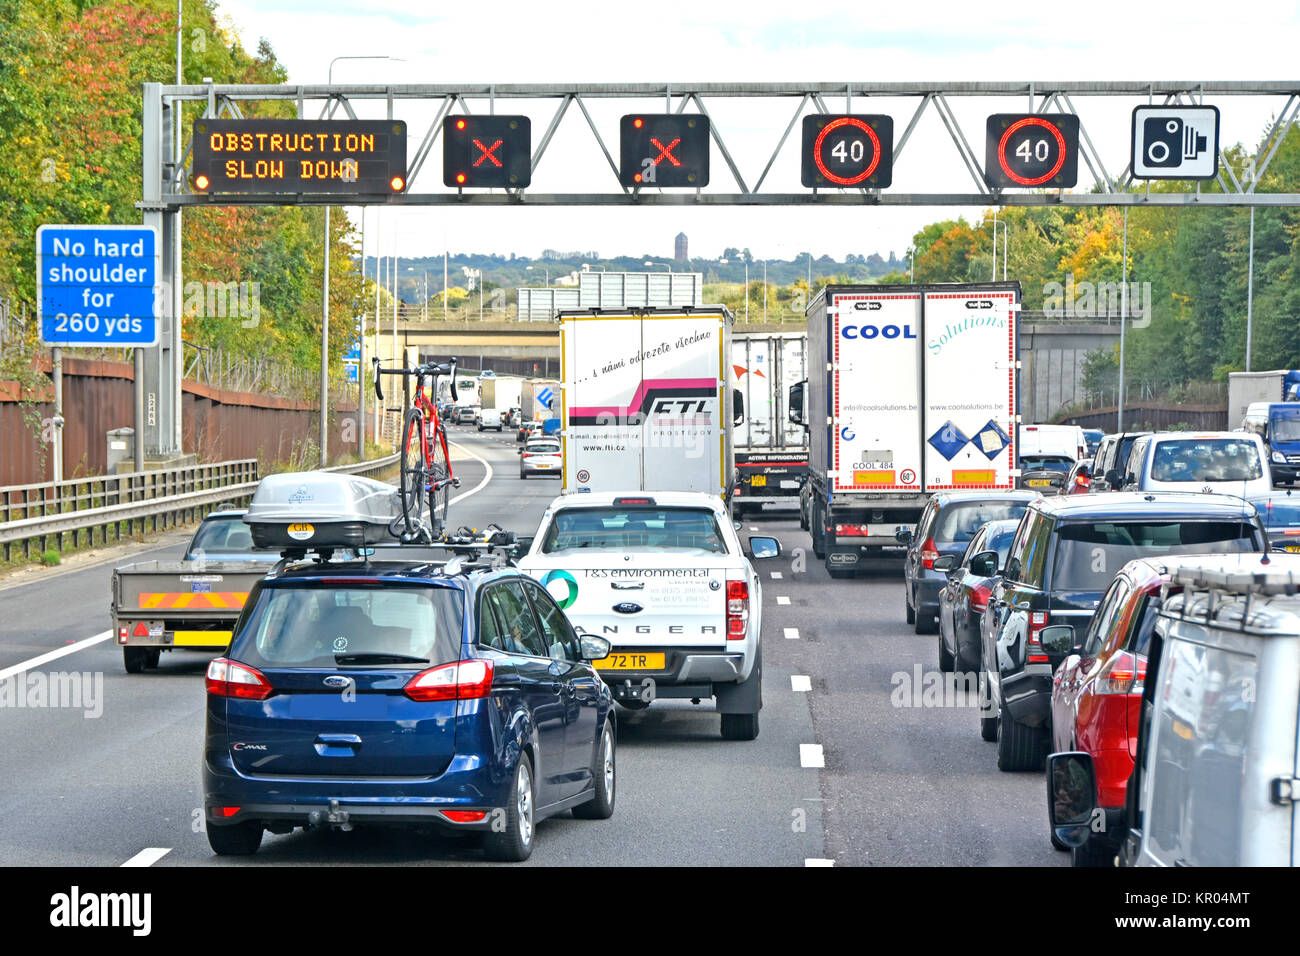 M25 motorway traffic jam signs indicate obstruction ahead two lanes closed queues as vehicles merge into two lanes Friday PM rush hour North London UK Stock Photo